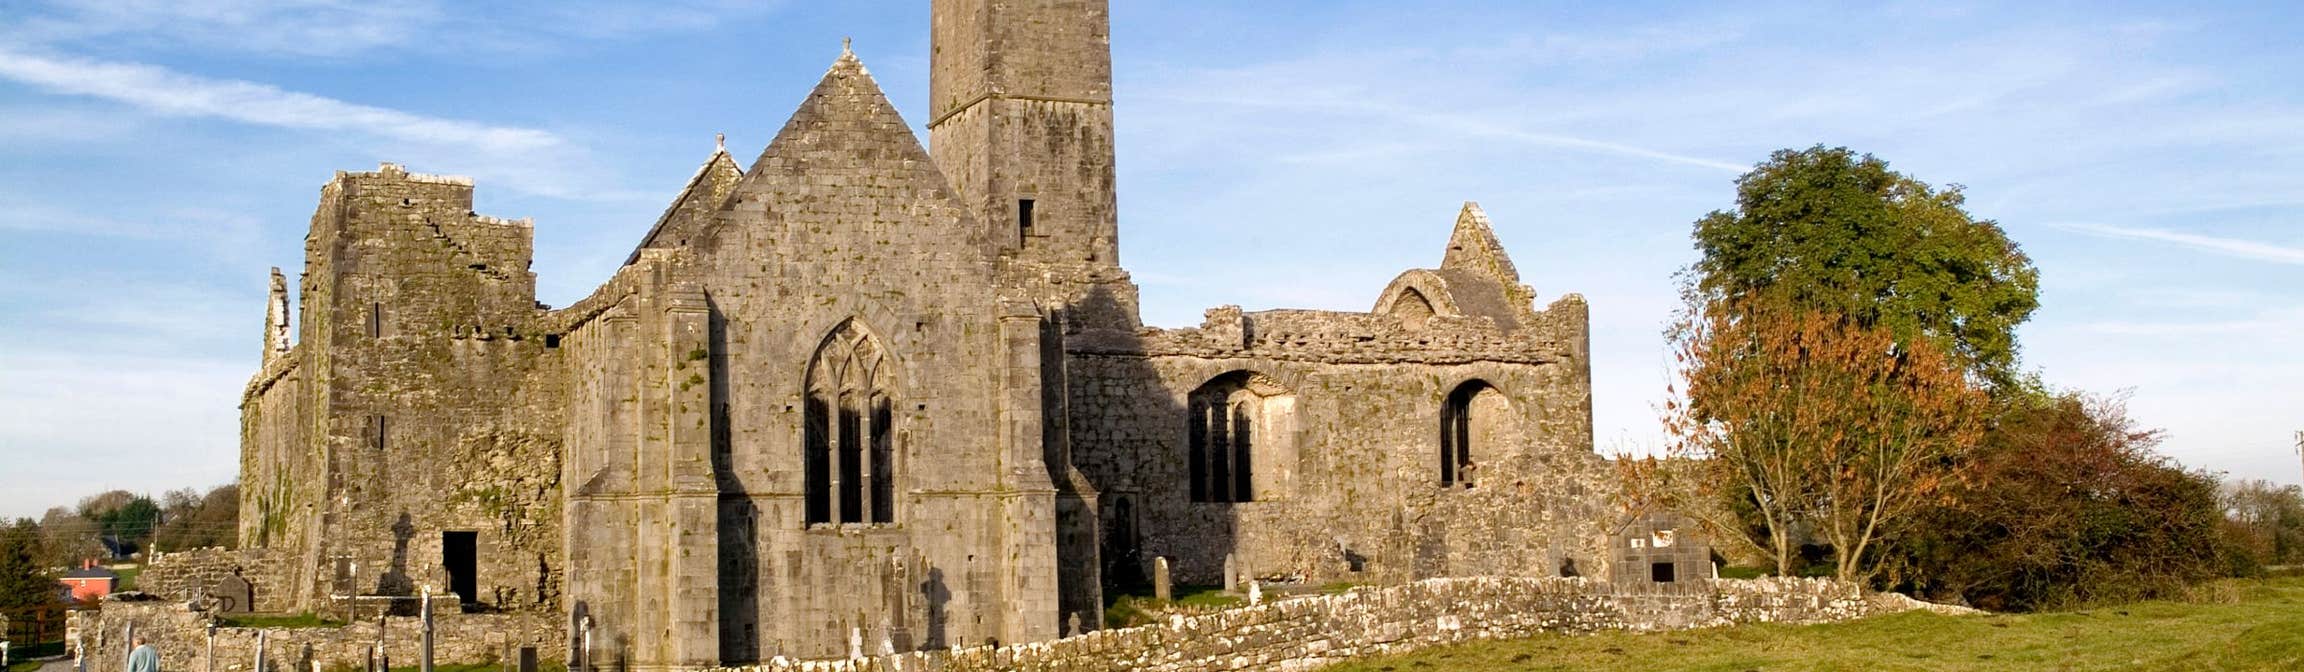 Image of Quin Franciscan Friary in County Clare